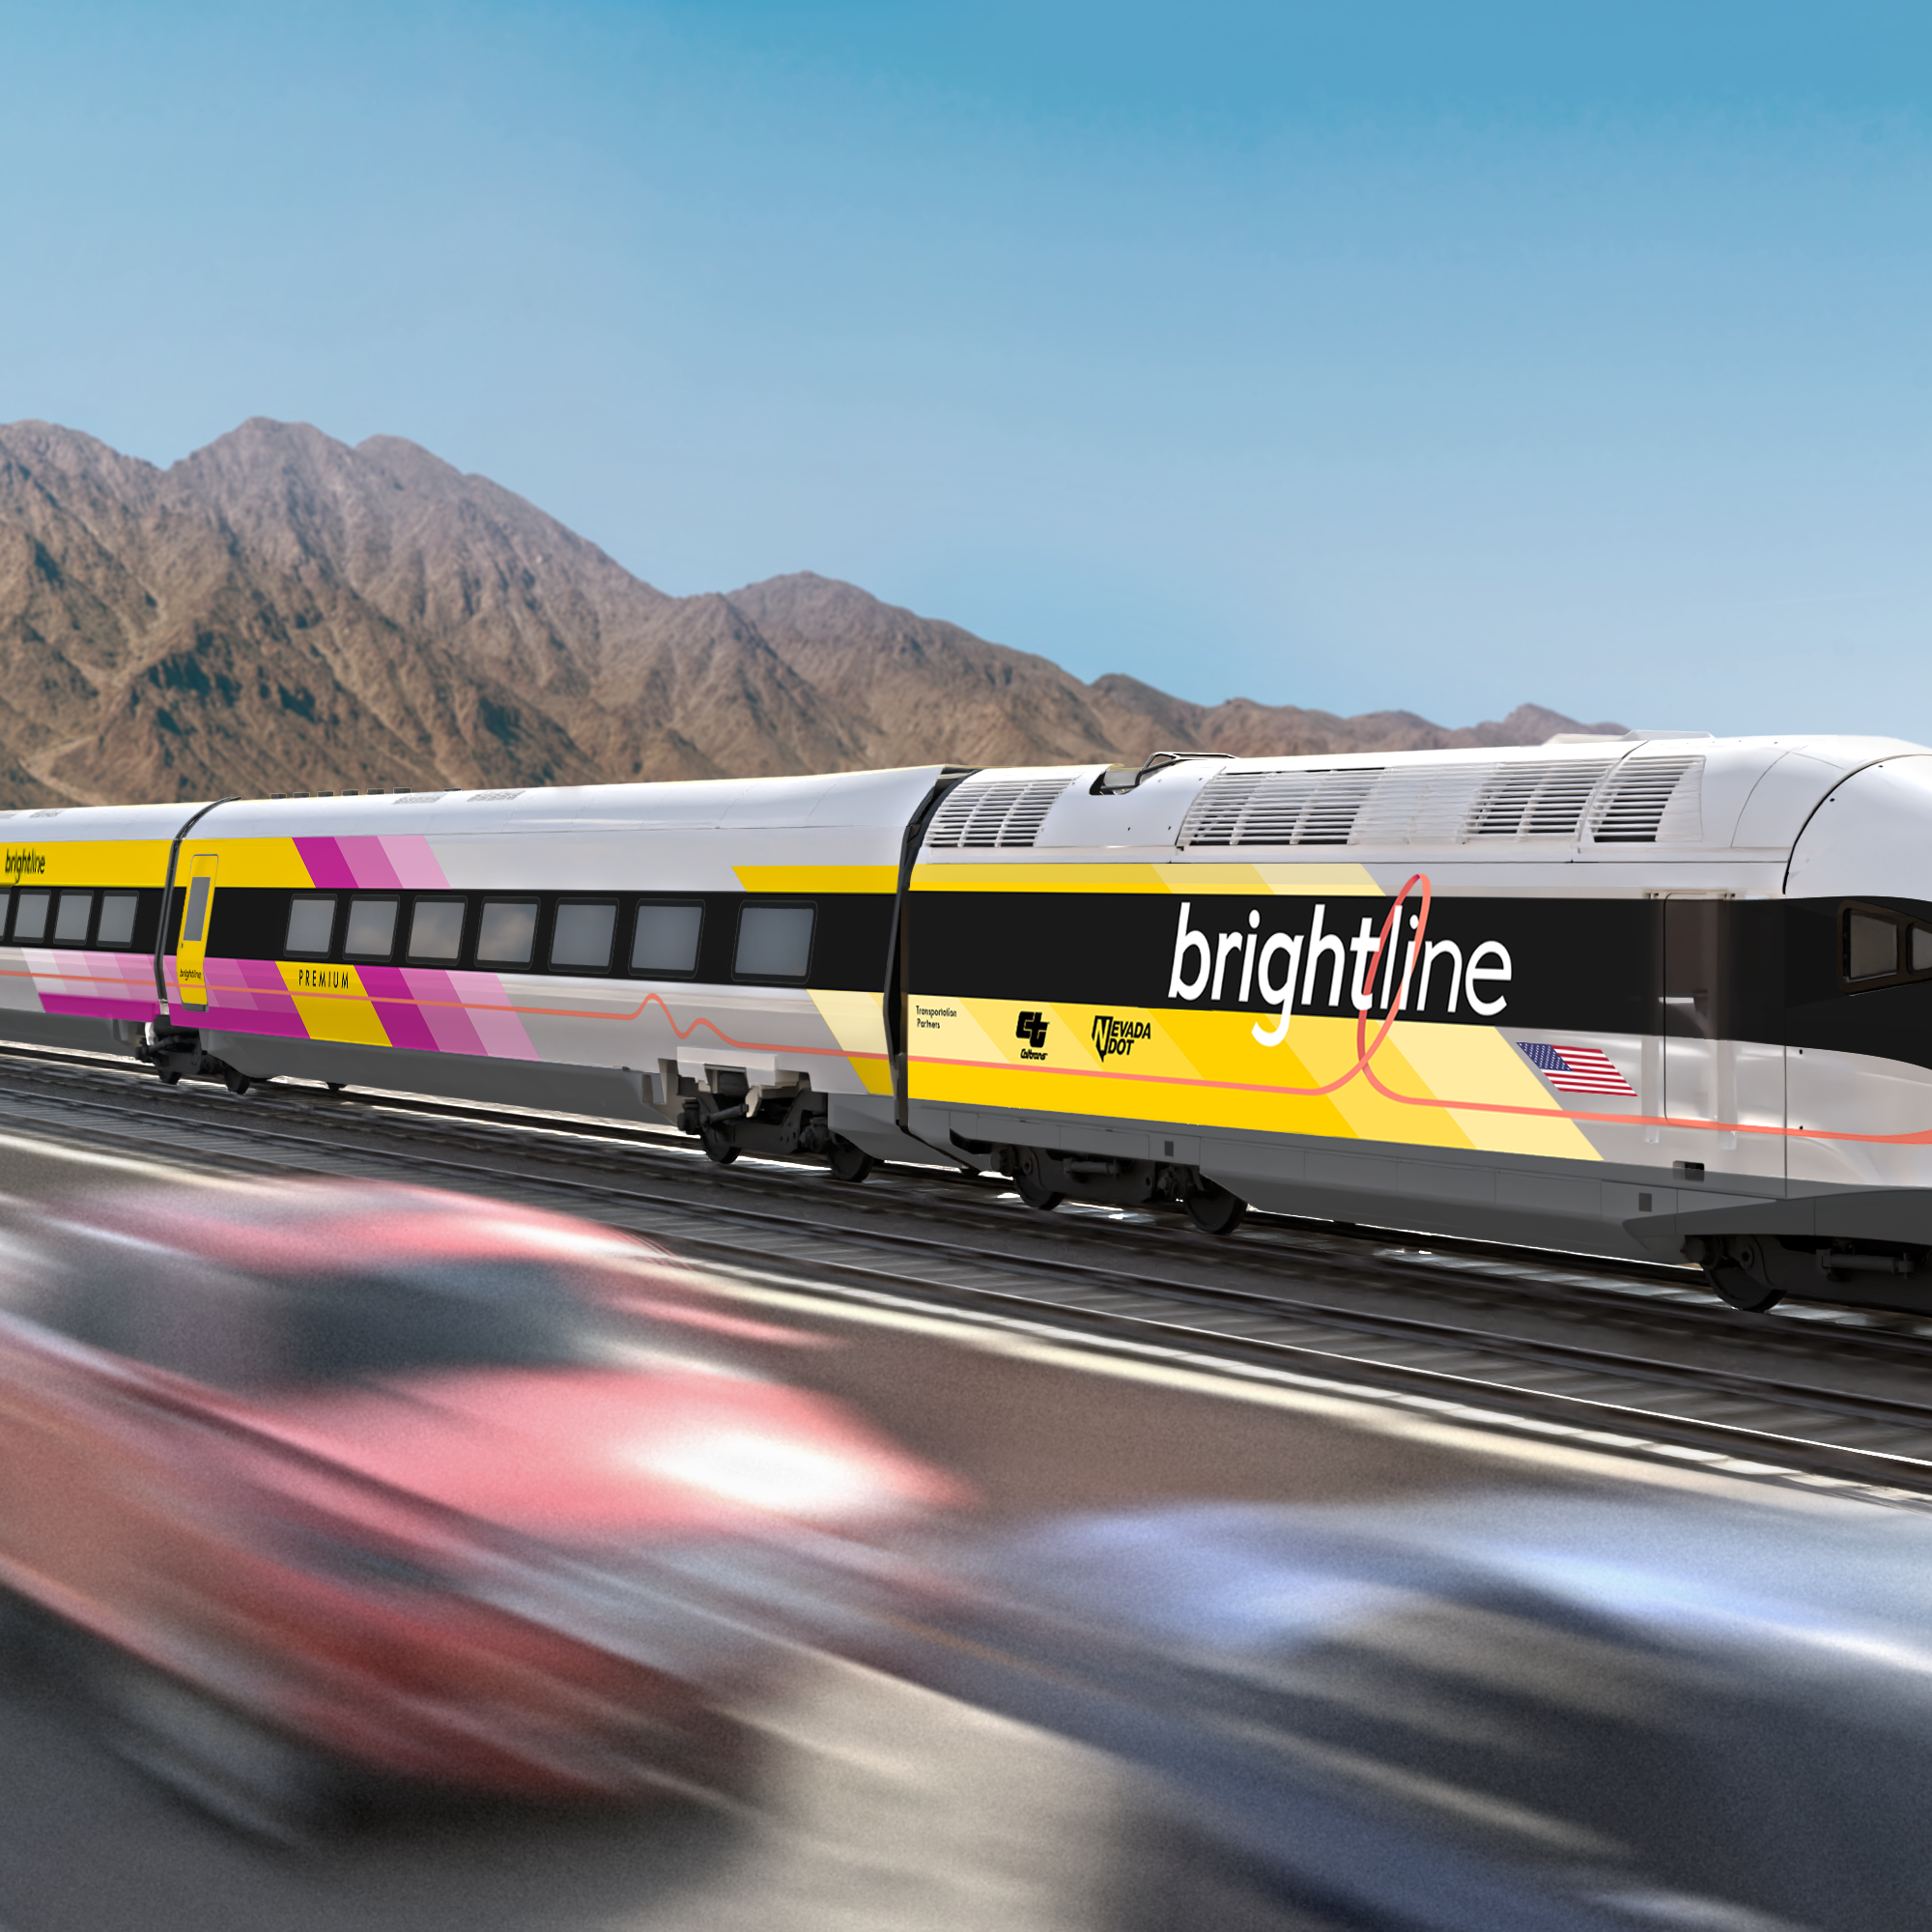 A rendering of the high-speed rail envisioned between Los Angeles and Las Vegas.